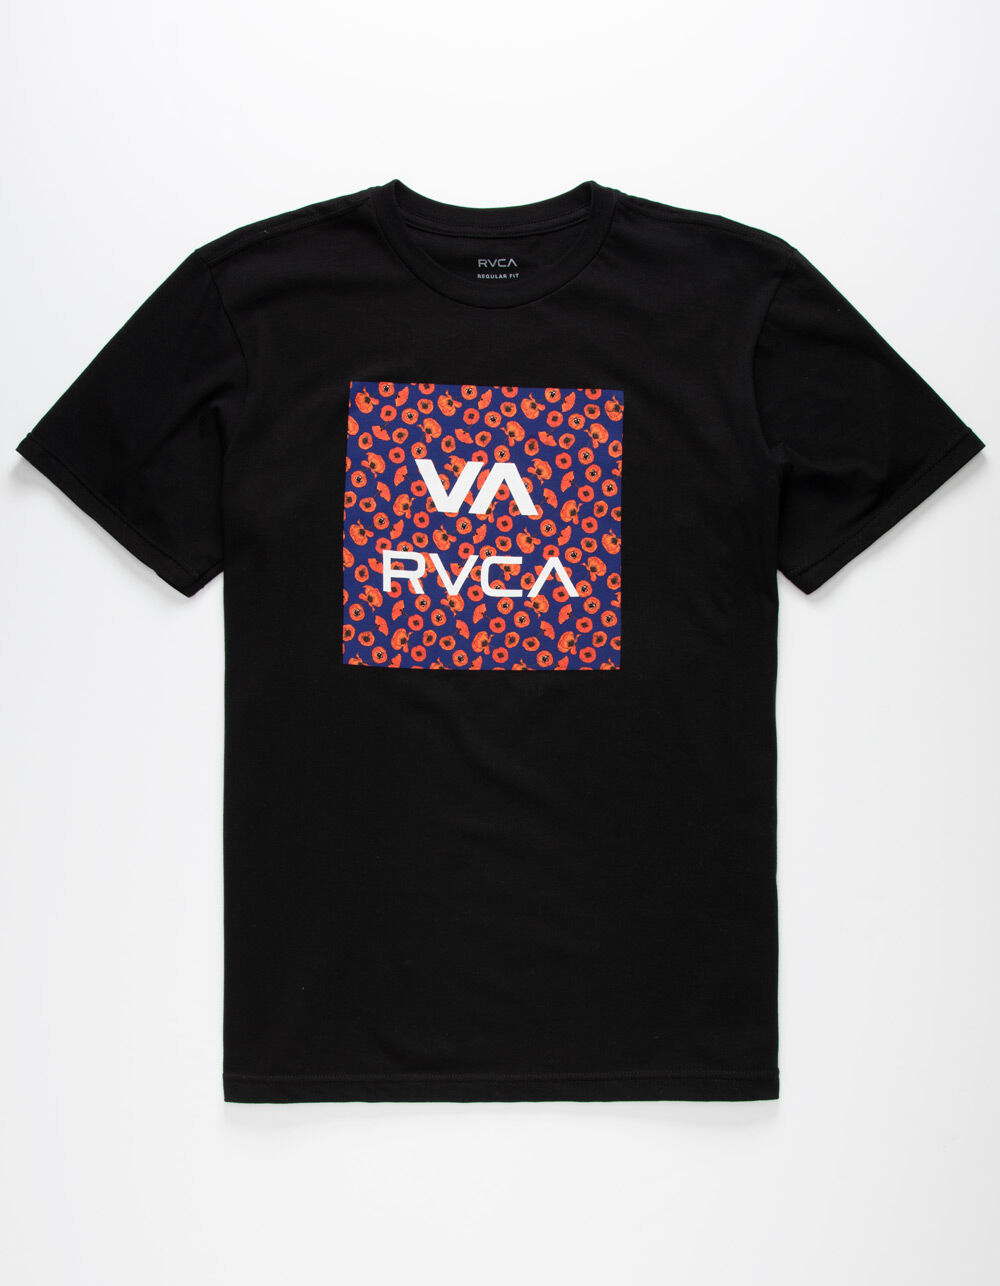 RVCA Porter Fill ATW Mens T-Shirt image number 0